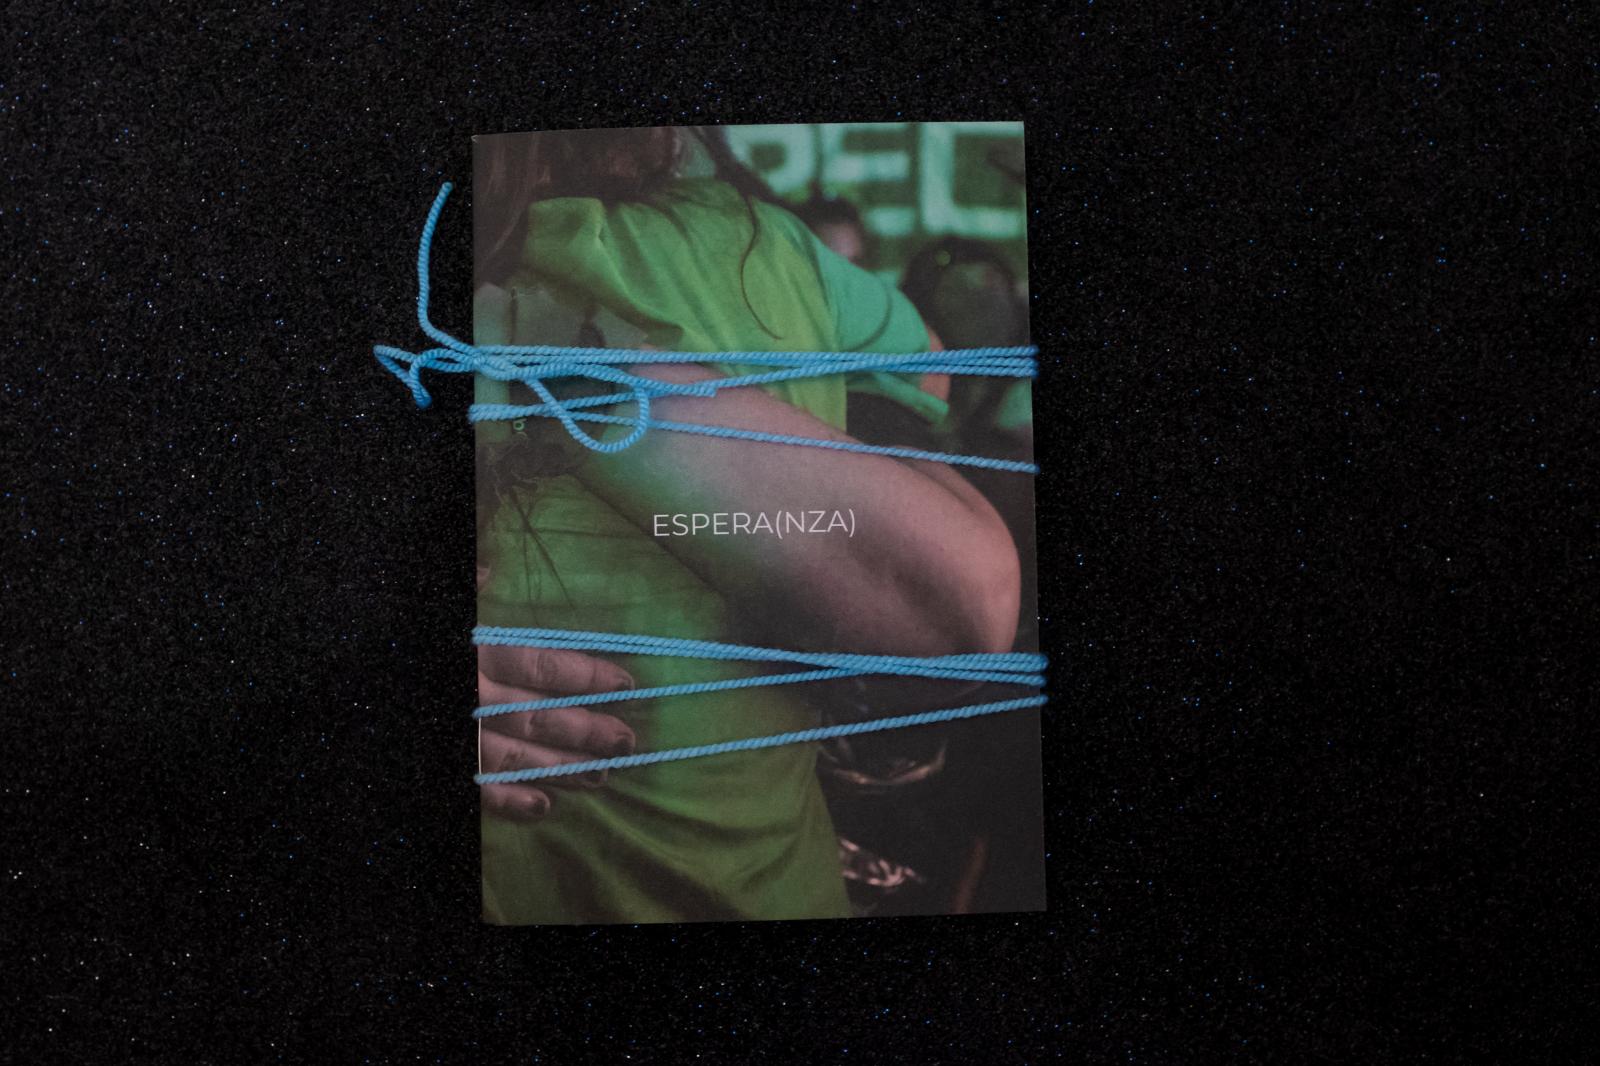 [PHOTOZINE] "Espera(nza), 2 nights of votation of the abortion law in Argentina".